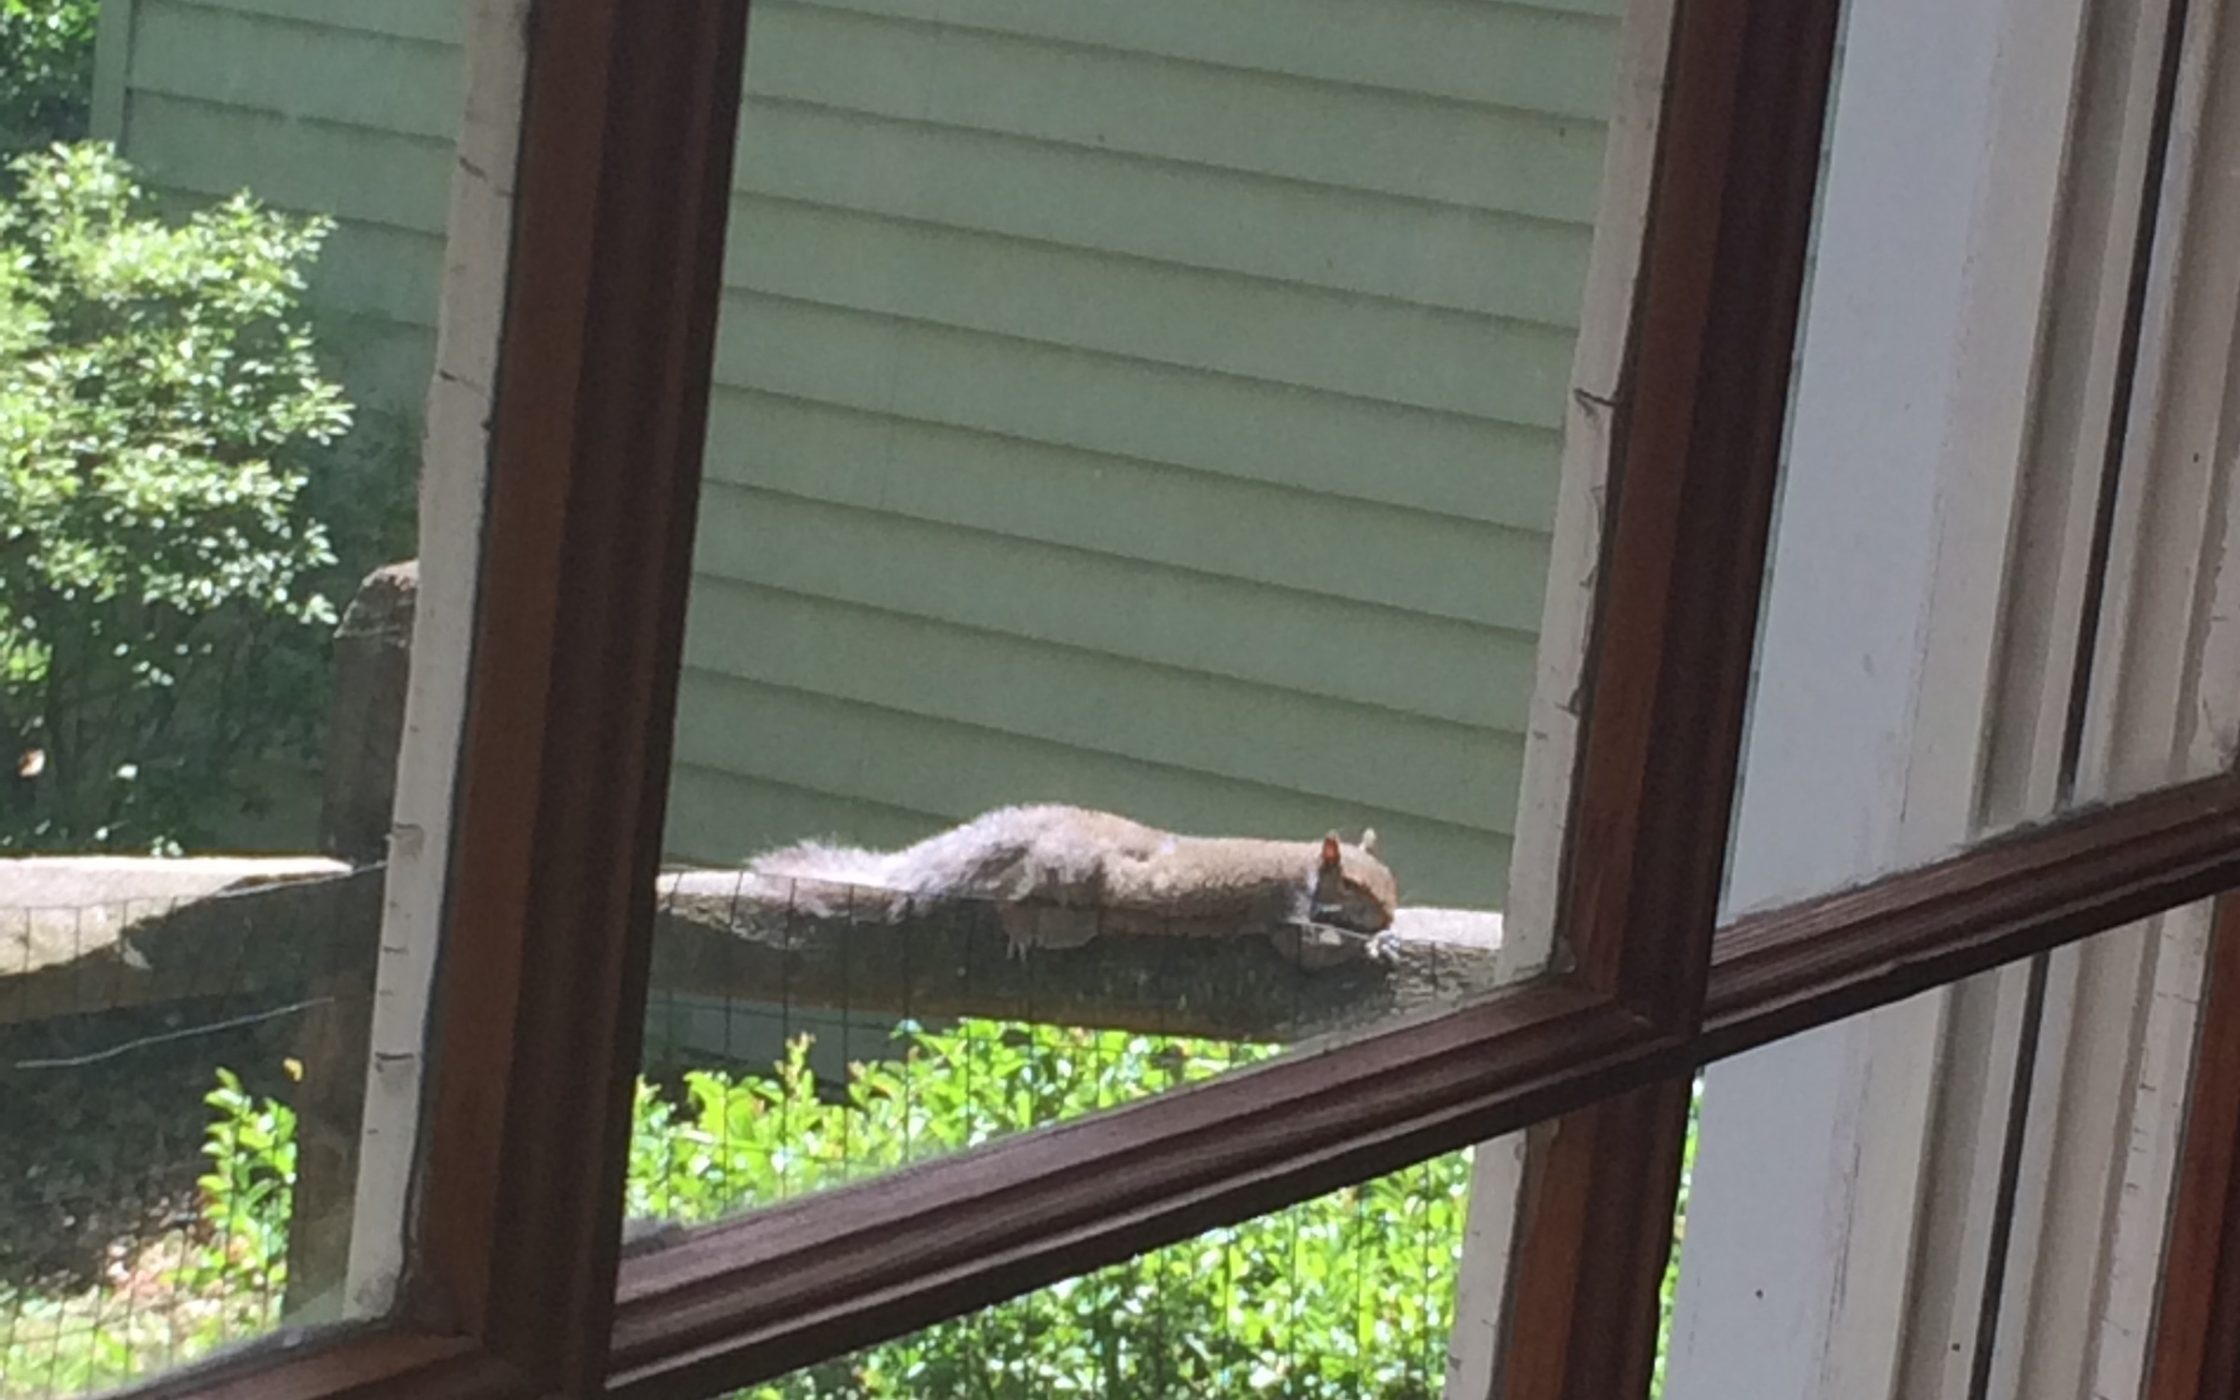 squirrel relaxing on a fence post